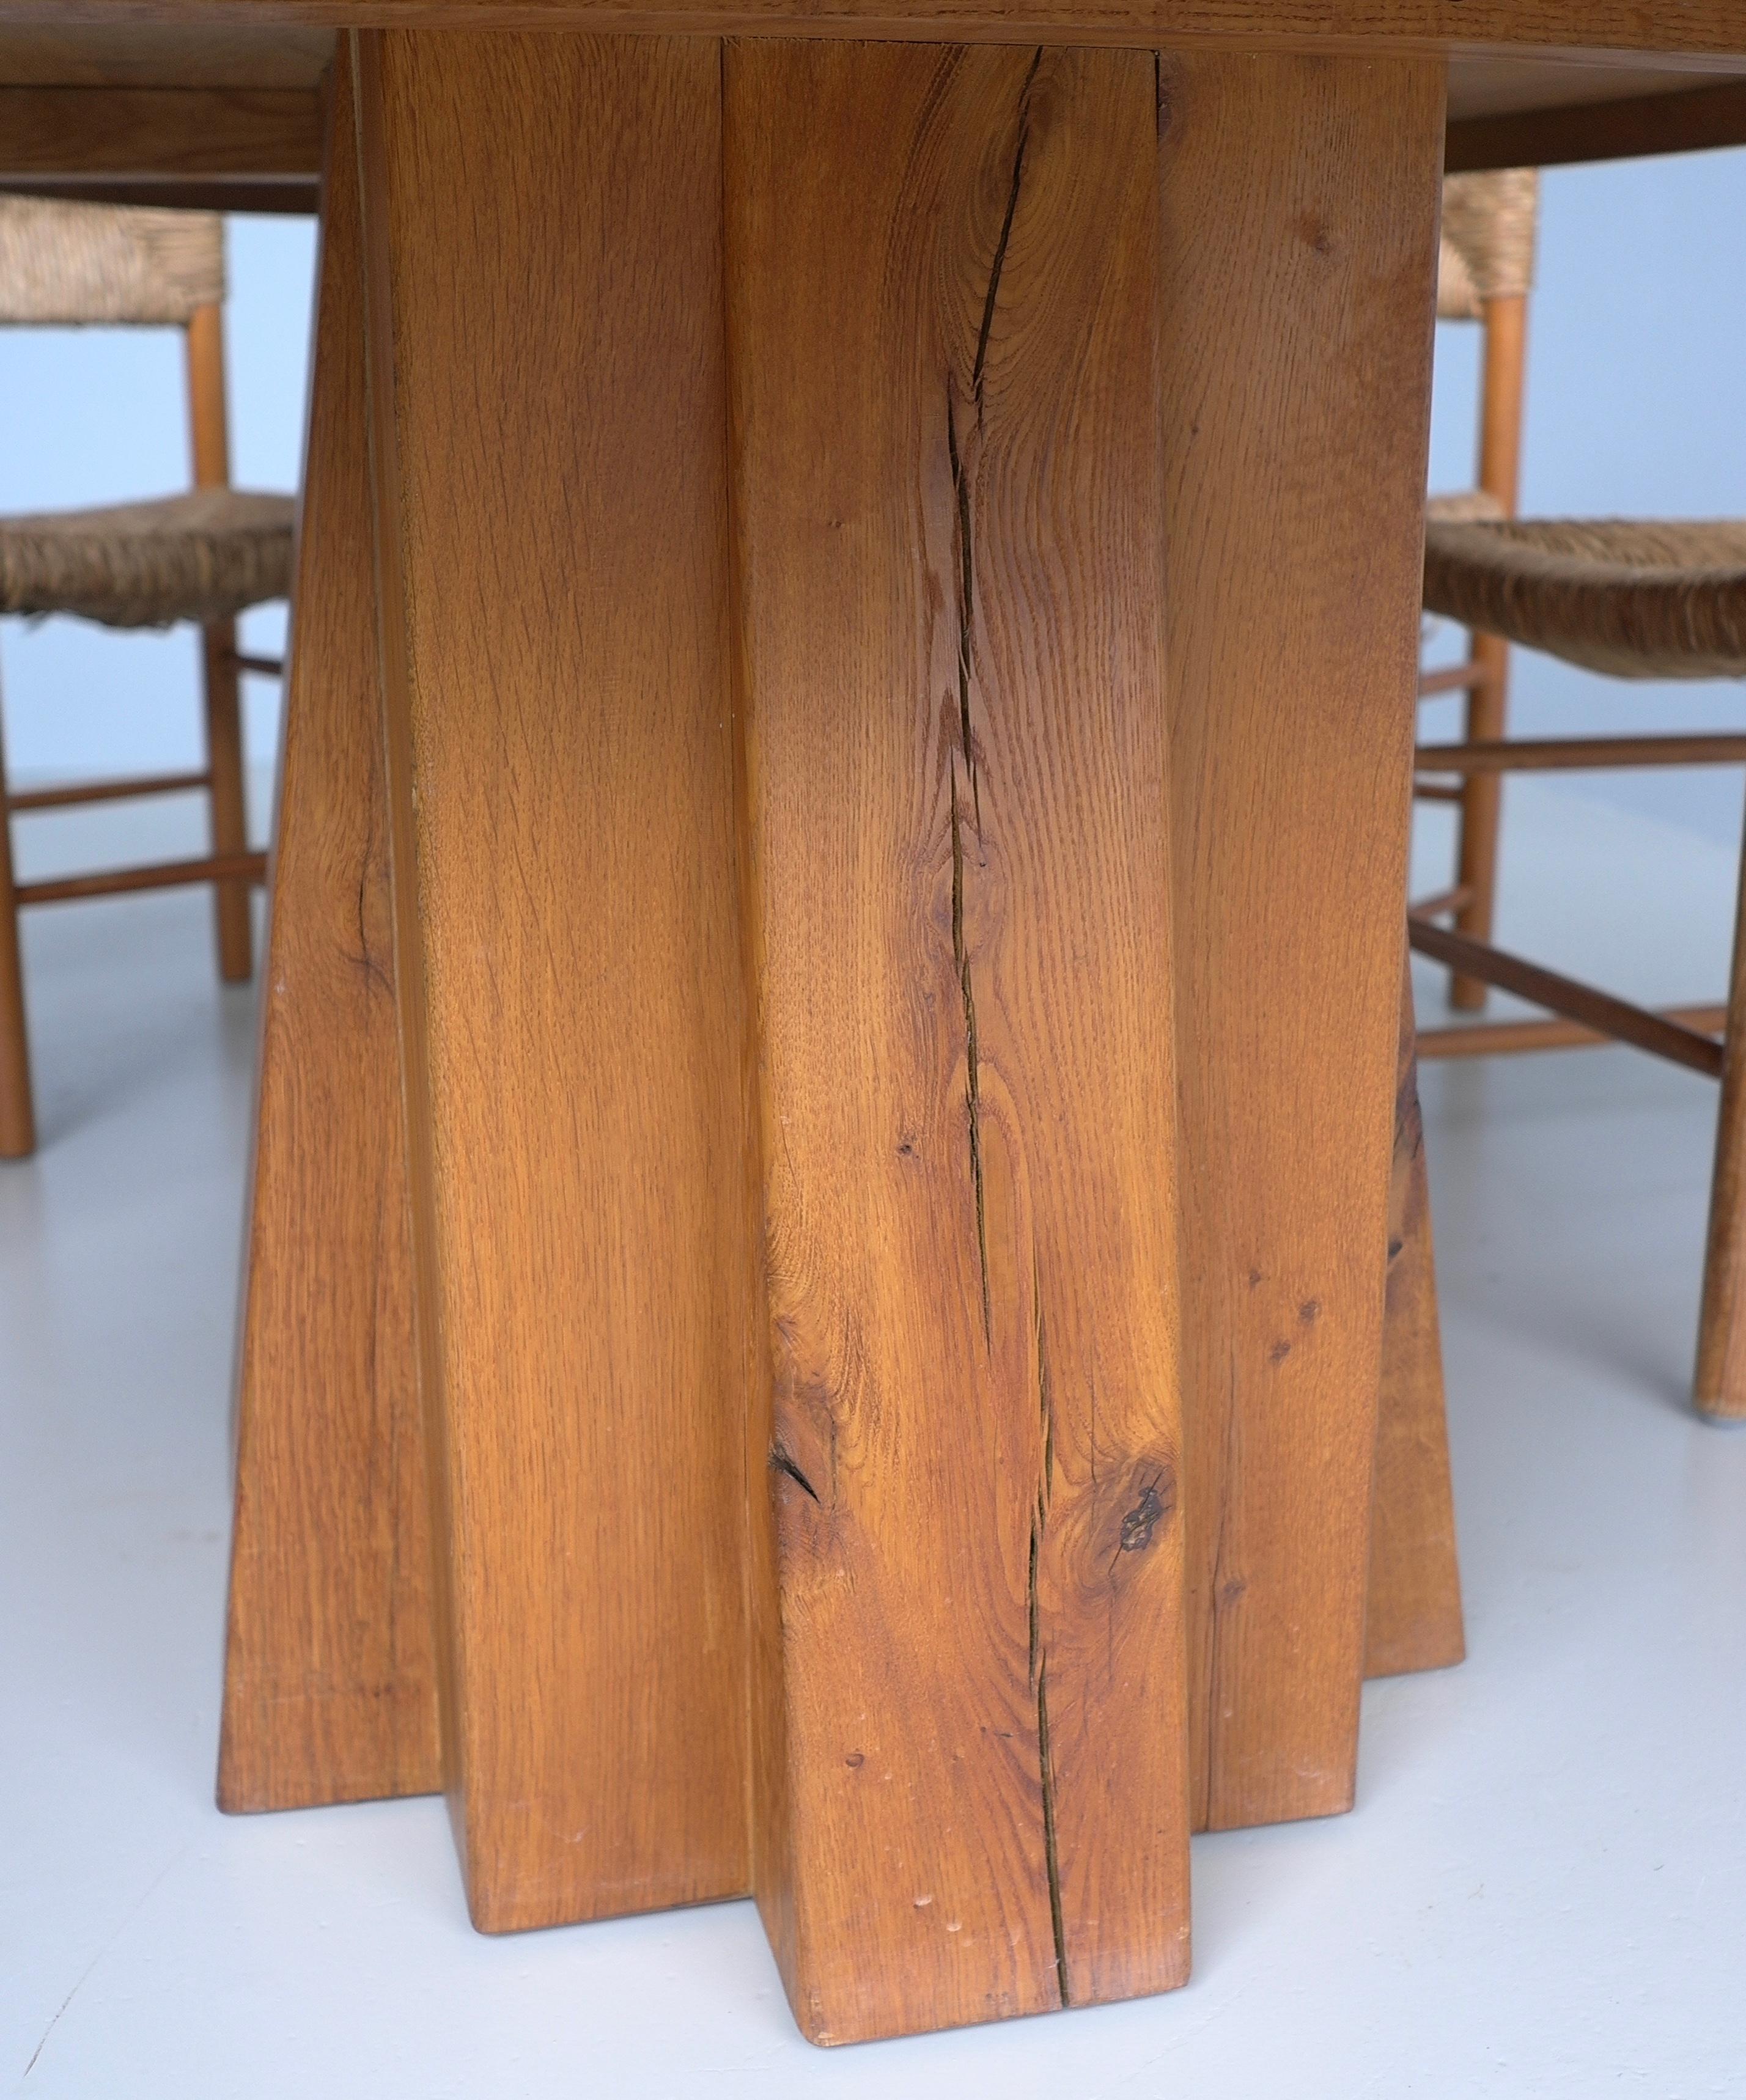 Large Oval Solid Oak Dining Table in style of Pierre Chapo, France circa 1970 For Sale 2